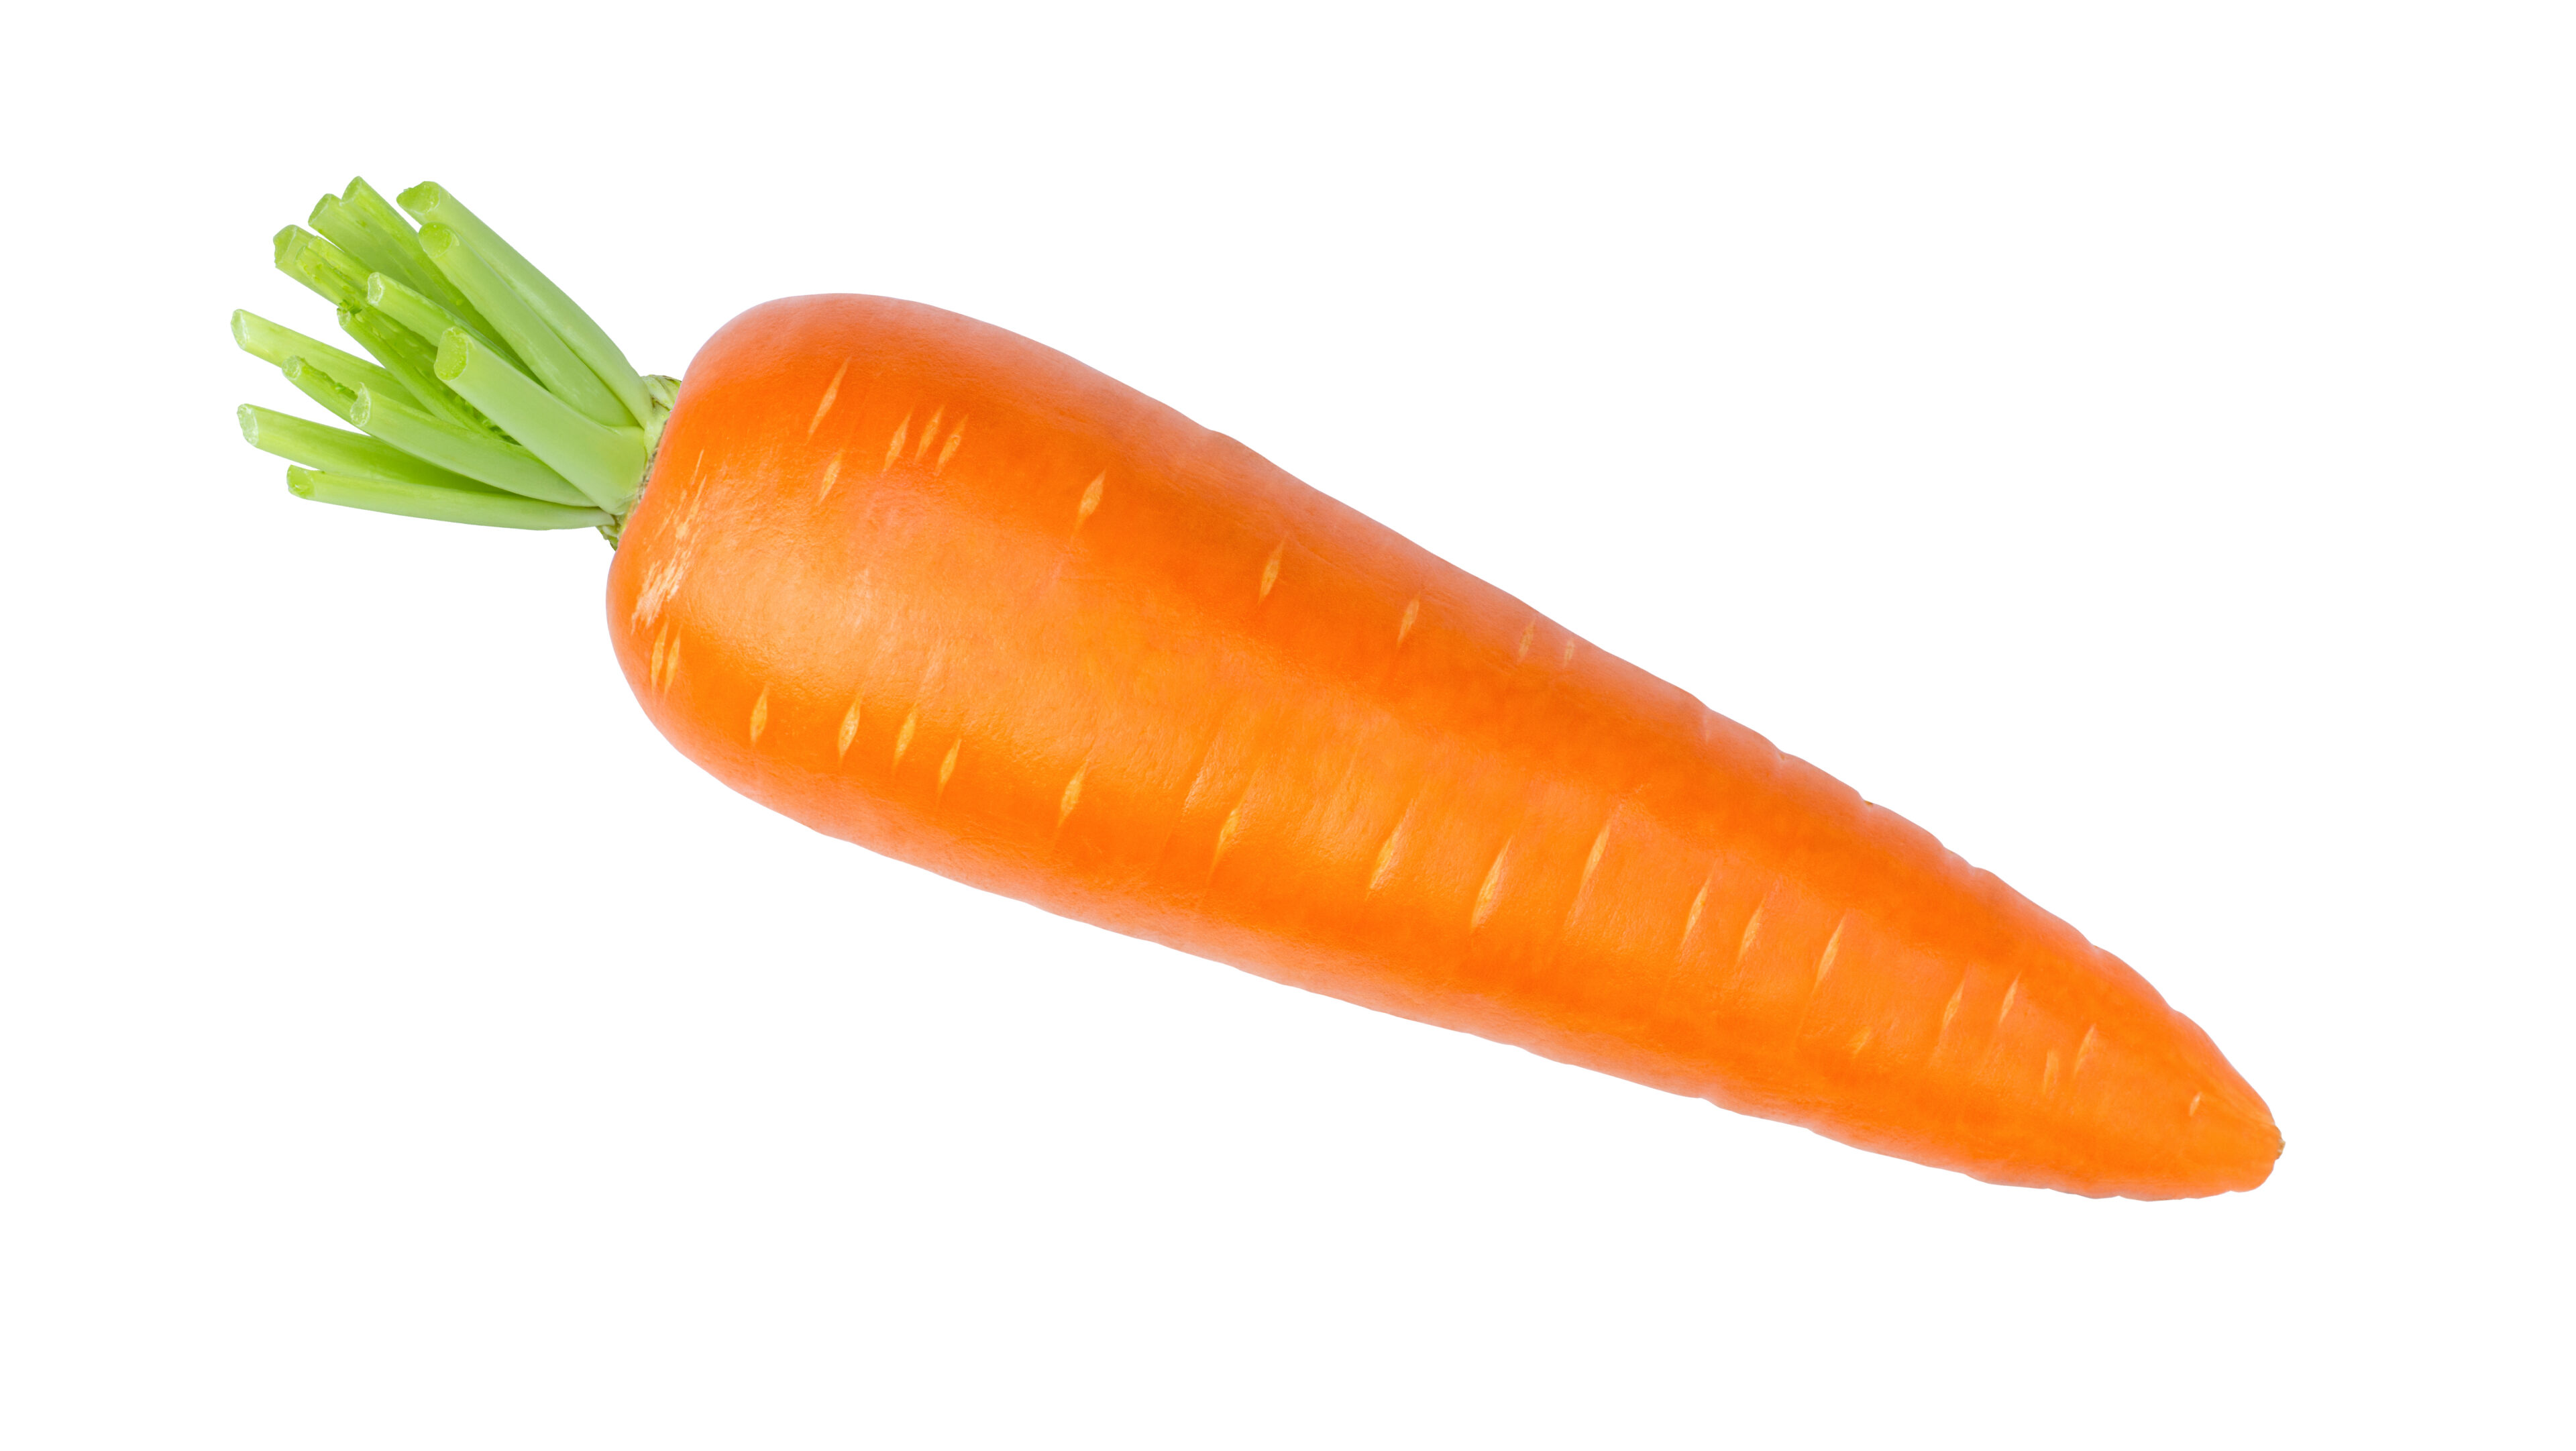 A Large Carrot